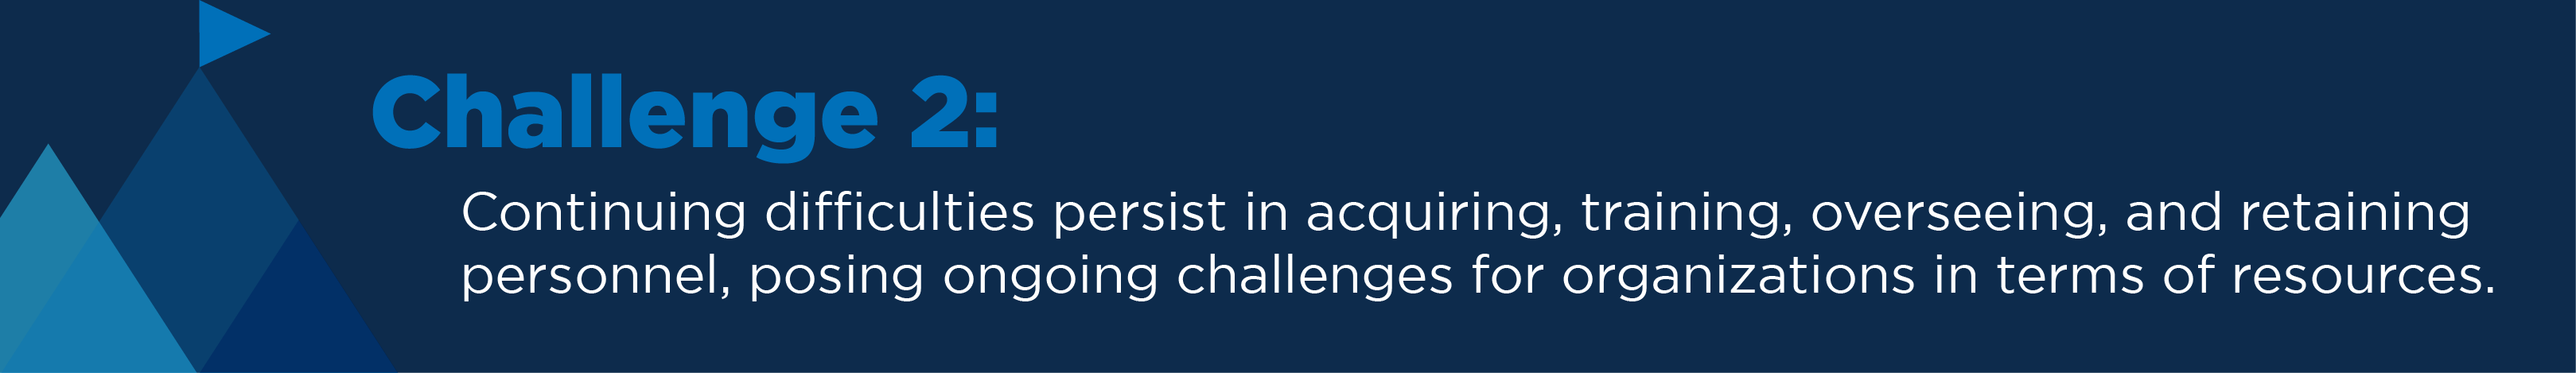 Challenge 2: Continuing difficulties persist in acquiring, training, overseeing, and retaining personnel, posing ongoing challenges for organizations in terms of resources.